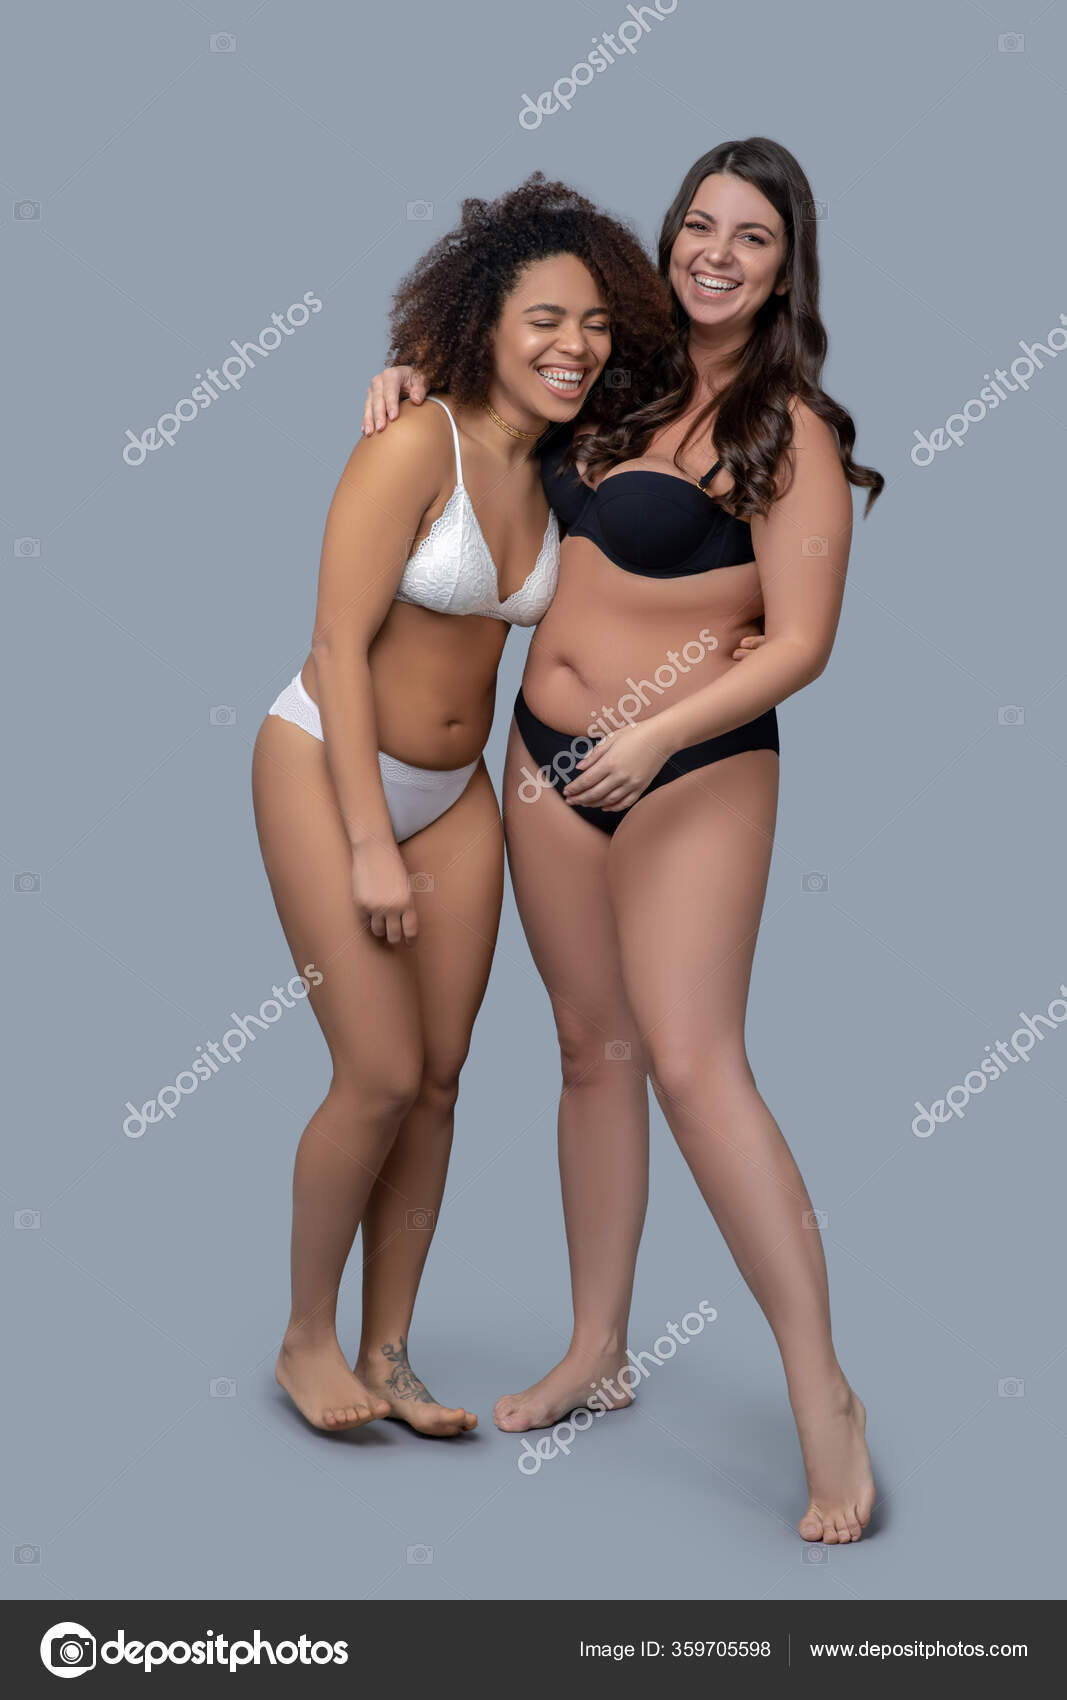 Two women in lingerie standing together on brown background. Young